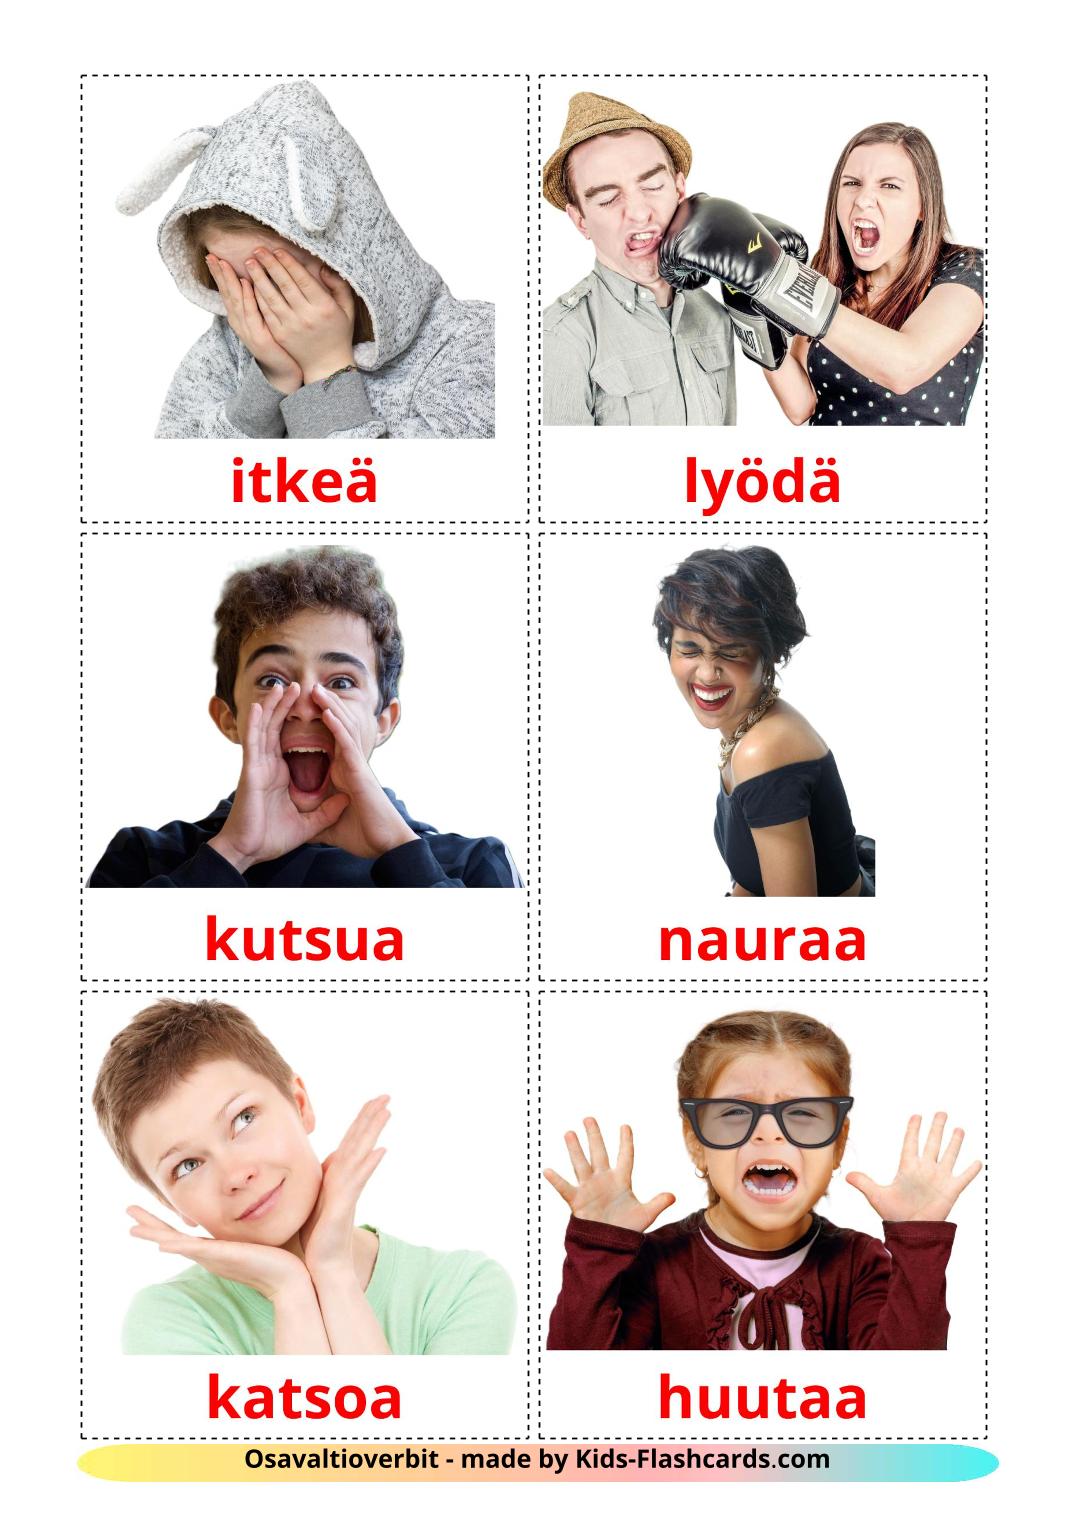 State verbs - 23 Free Printable finnish Flashcards 